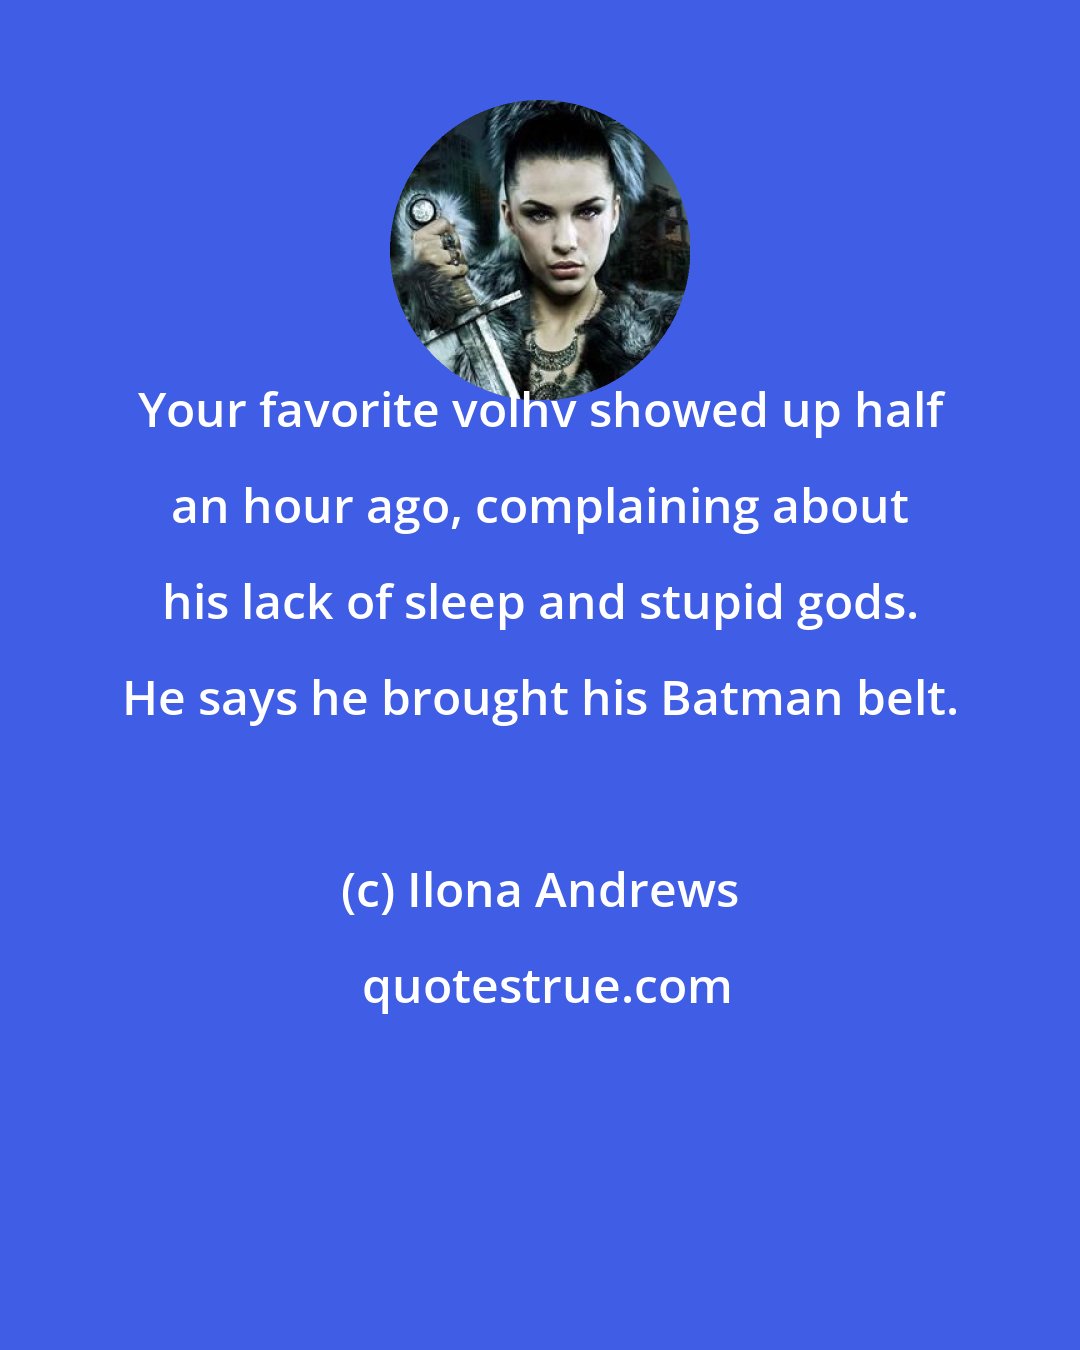 Ilona Andrews: Your favorite volhv showed up half an hour ago, complaining about his lack of sleep and stupid gods. He says he brought his Batman belt.